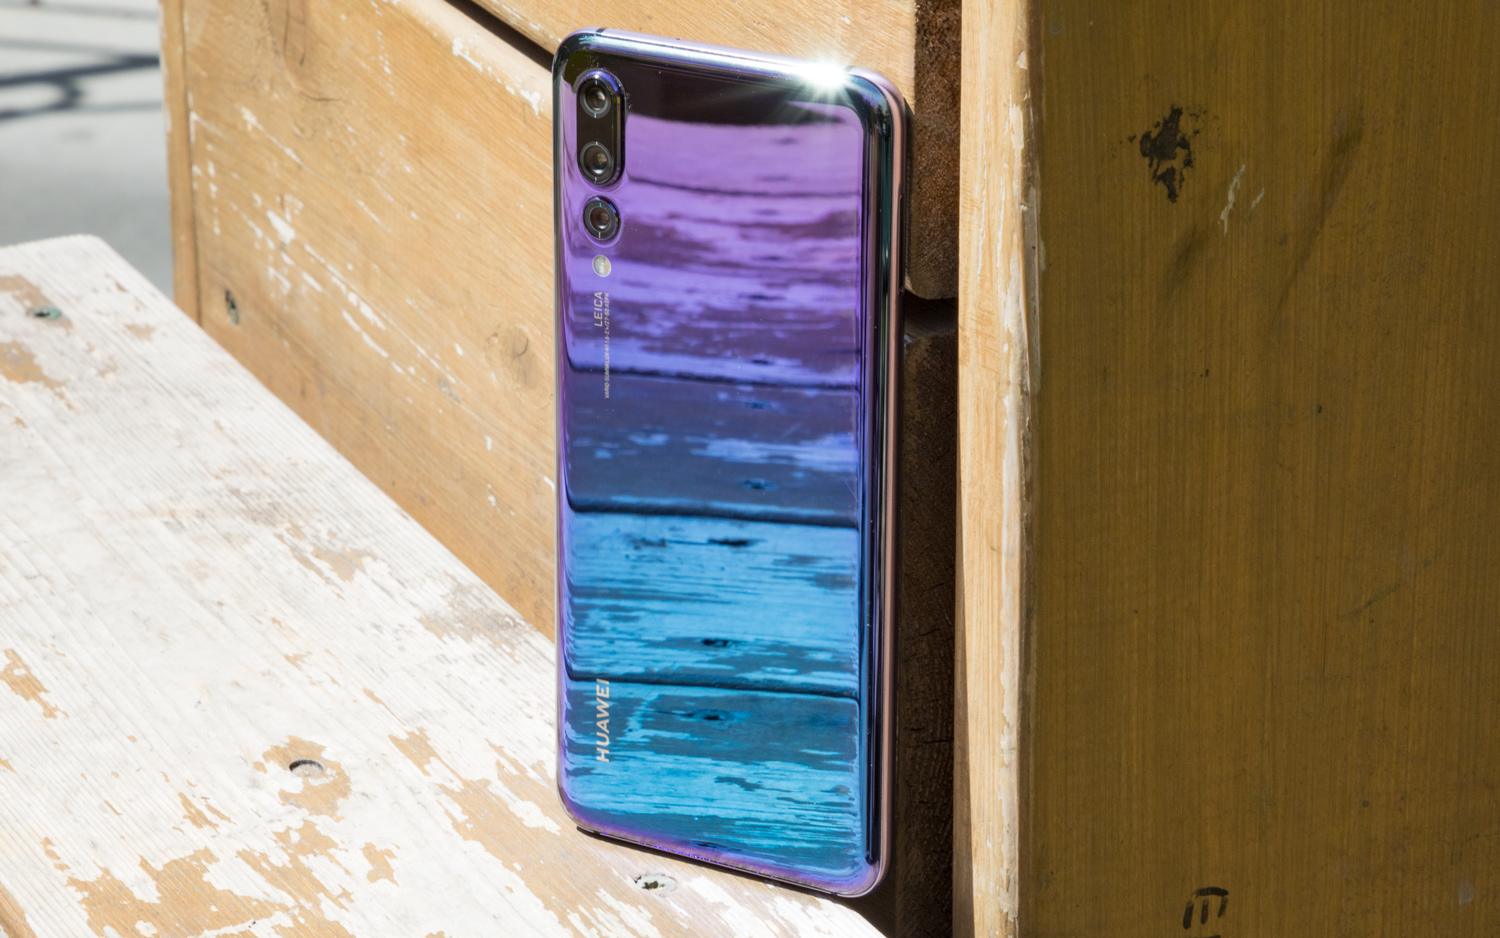 Huawei P20 Pro hands-on: 3x zoom lens leaves the competition behind:  Digital Photography Review